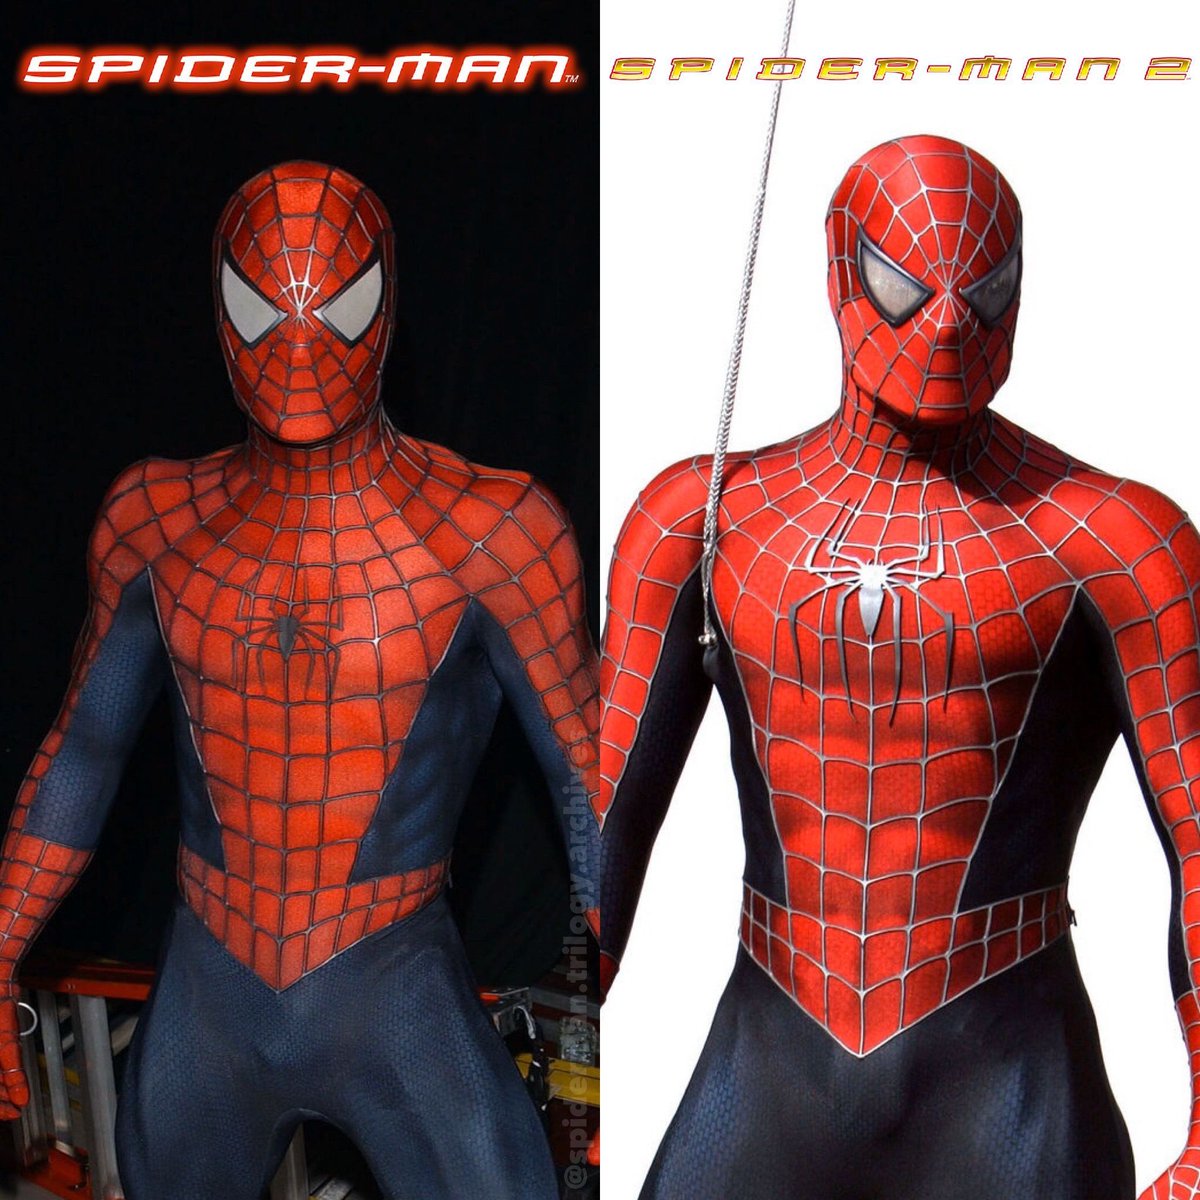 RT @Space_Dasher: INHALE

Spider-Man 2002 has the best suit out of the whole Raimi trilogy

Send Tweet. https://t.co/jnI5vrkVGl